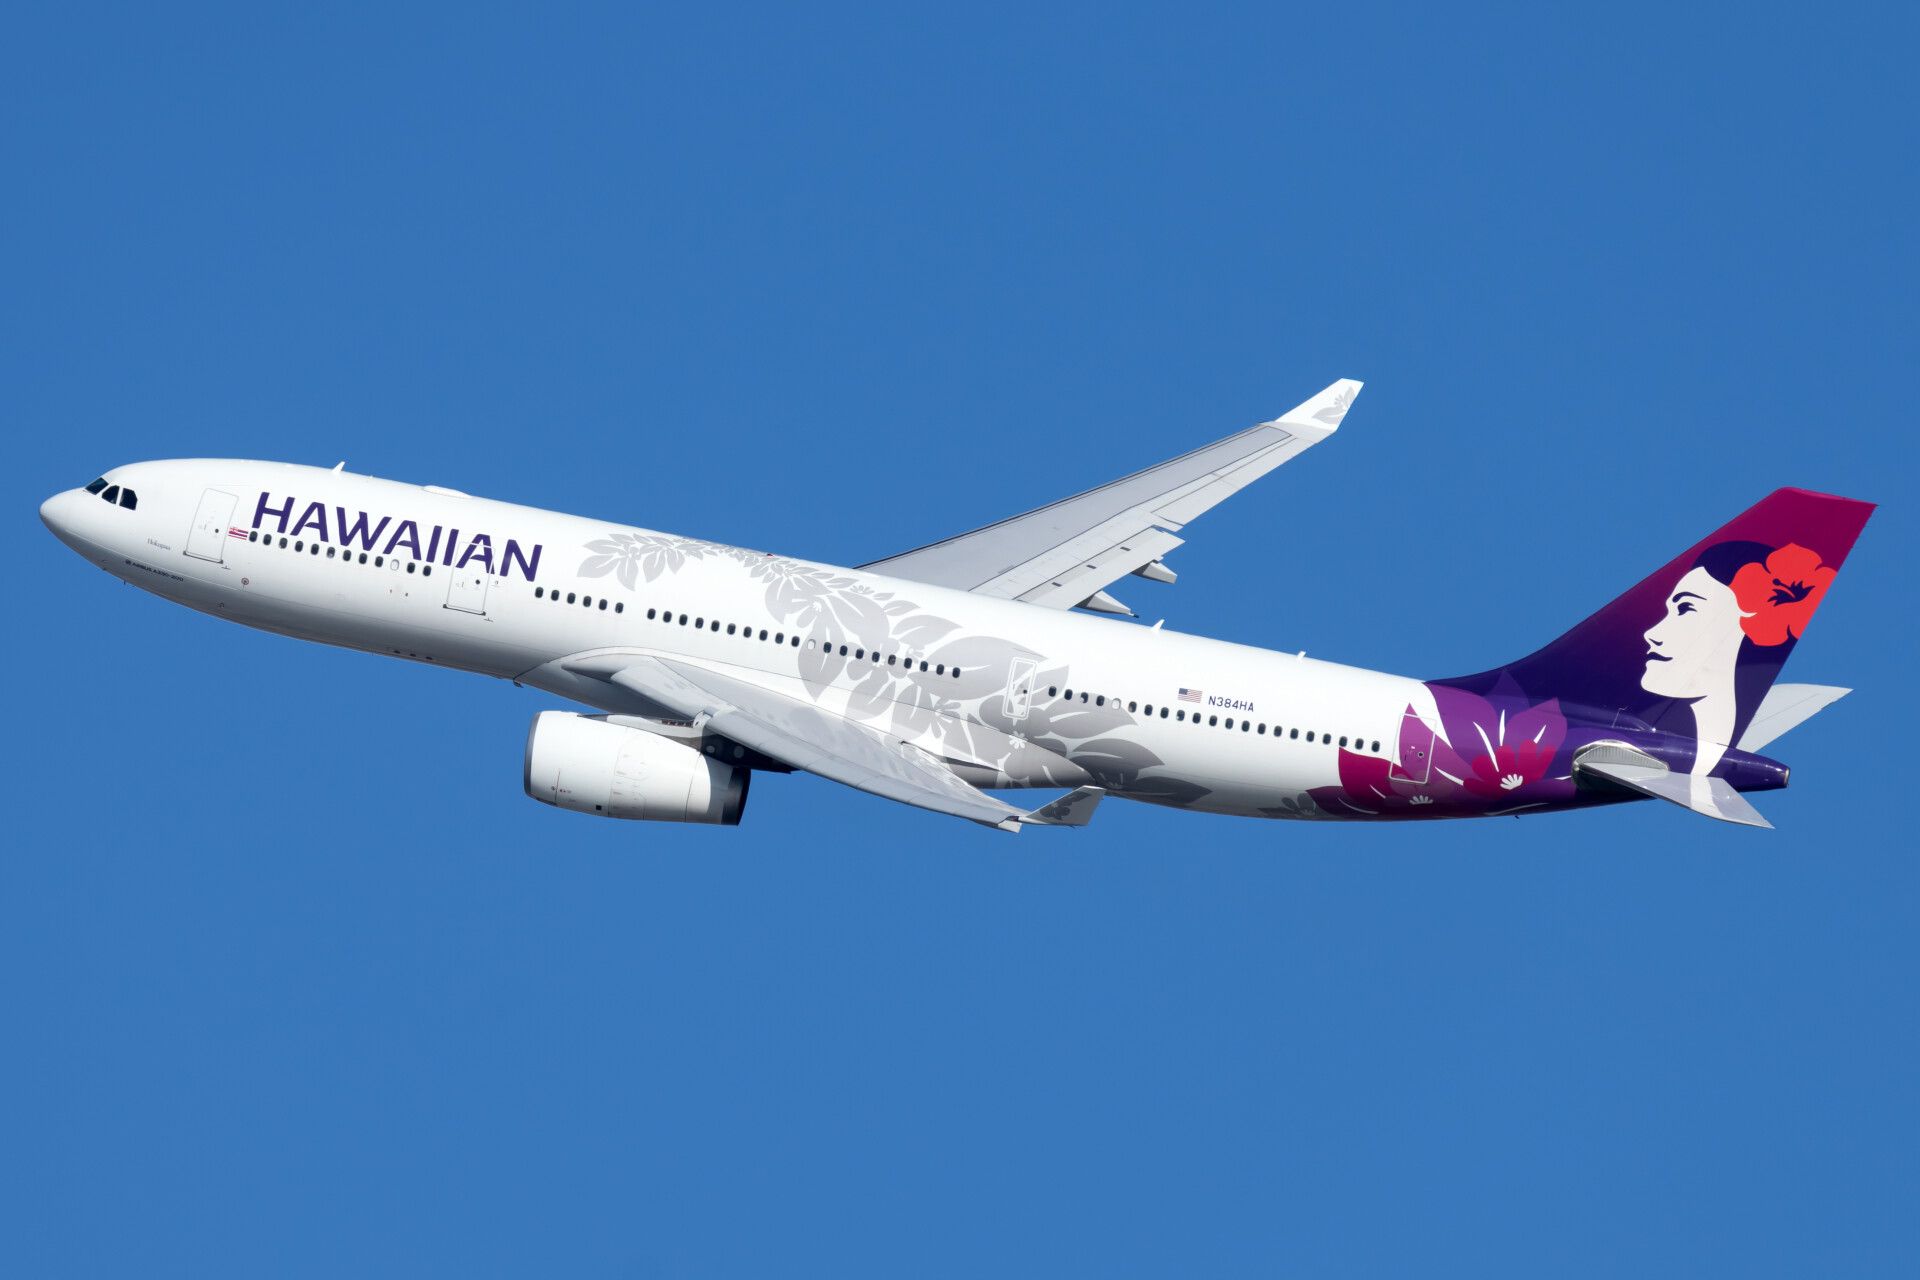 Japan One Of Hawaiian Airlines Most Important Markets